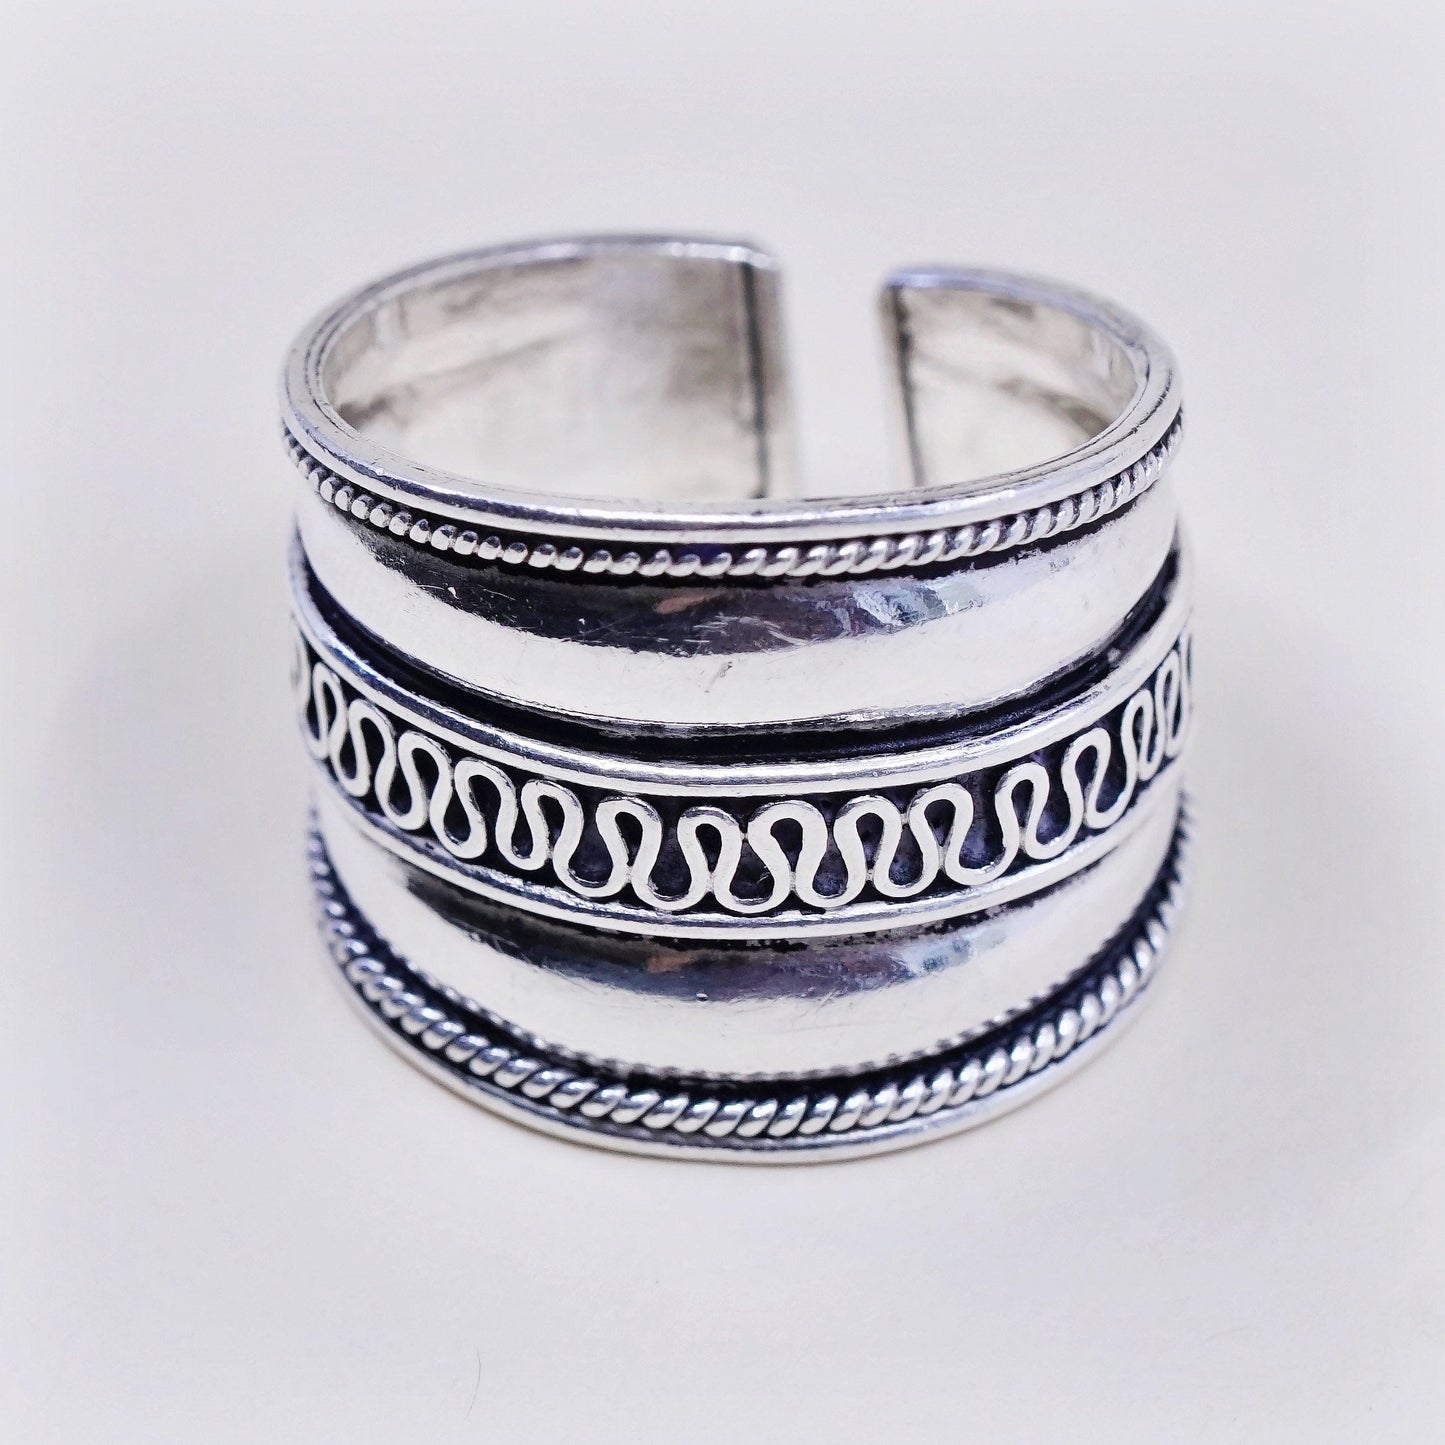 Size 9.5, Vintage sterling silver handmade ring, 925 cable textured wide band